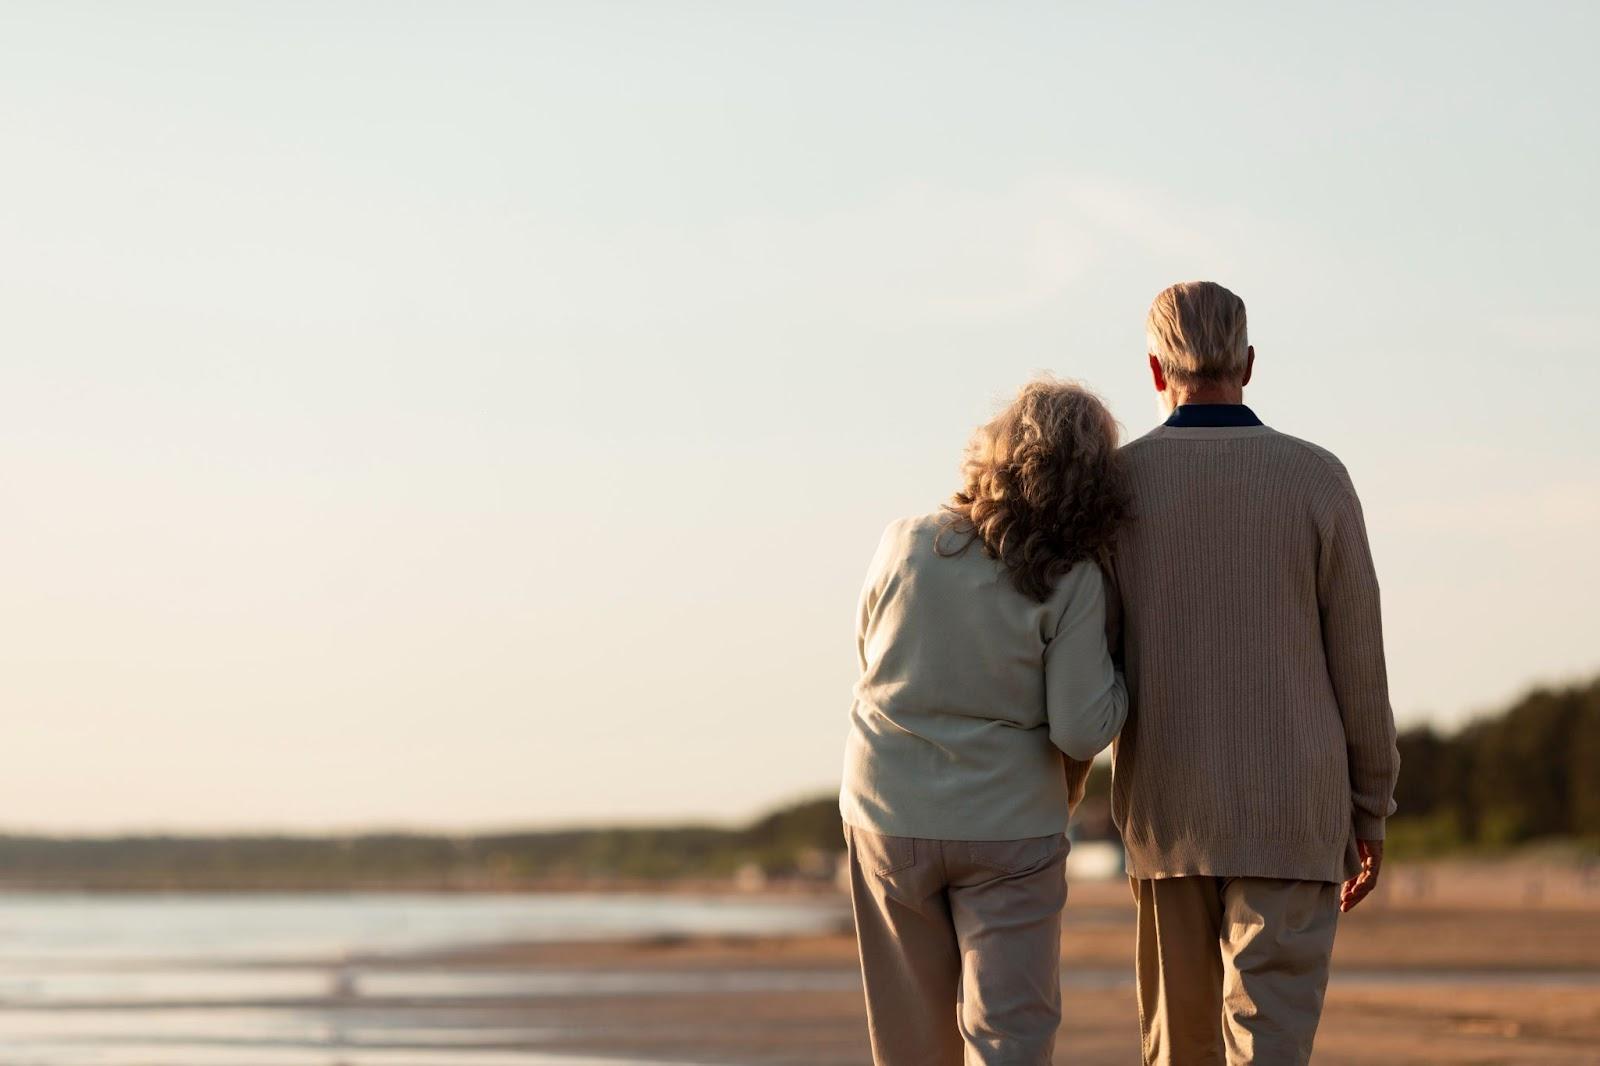 An elderly couple holding hands on a beach

Description automatically generated